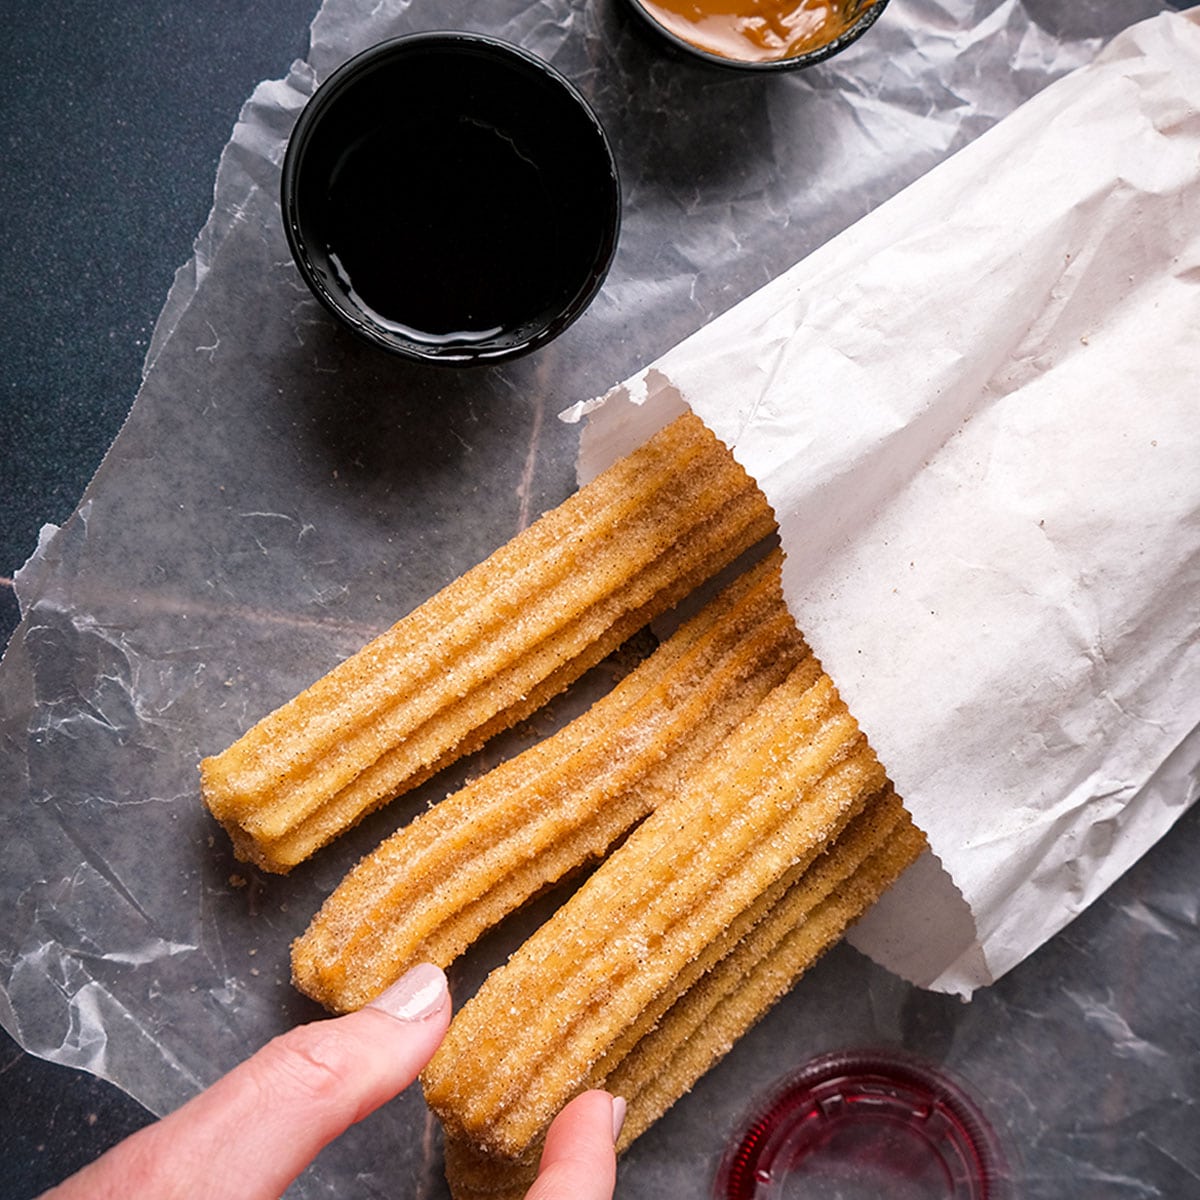 A quick and easy way to reheat churros is to heat them in an oven or air fryer. This ensures that all the sides of the churro are reheated